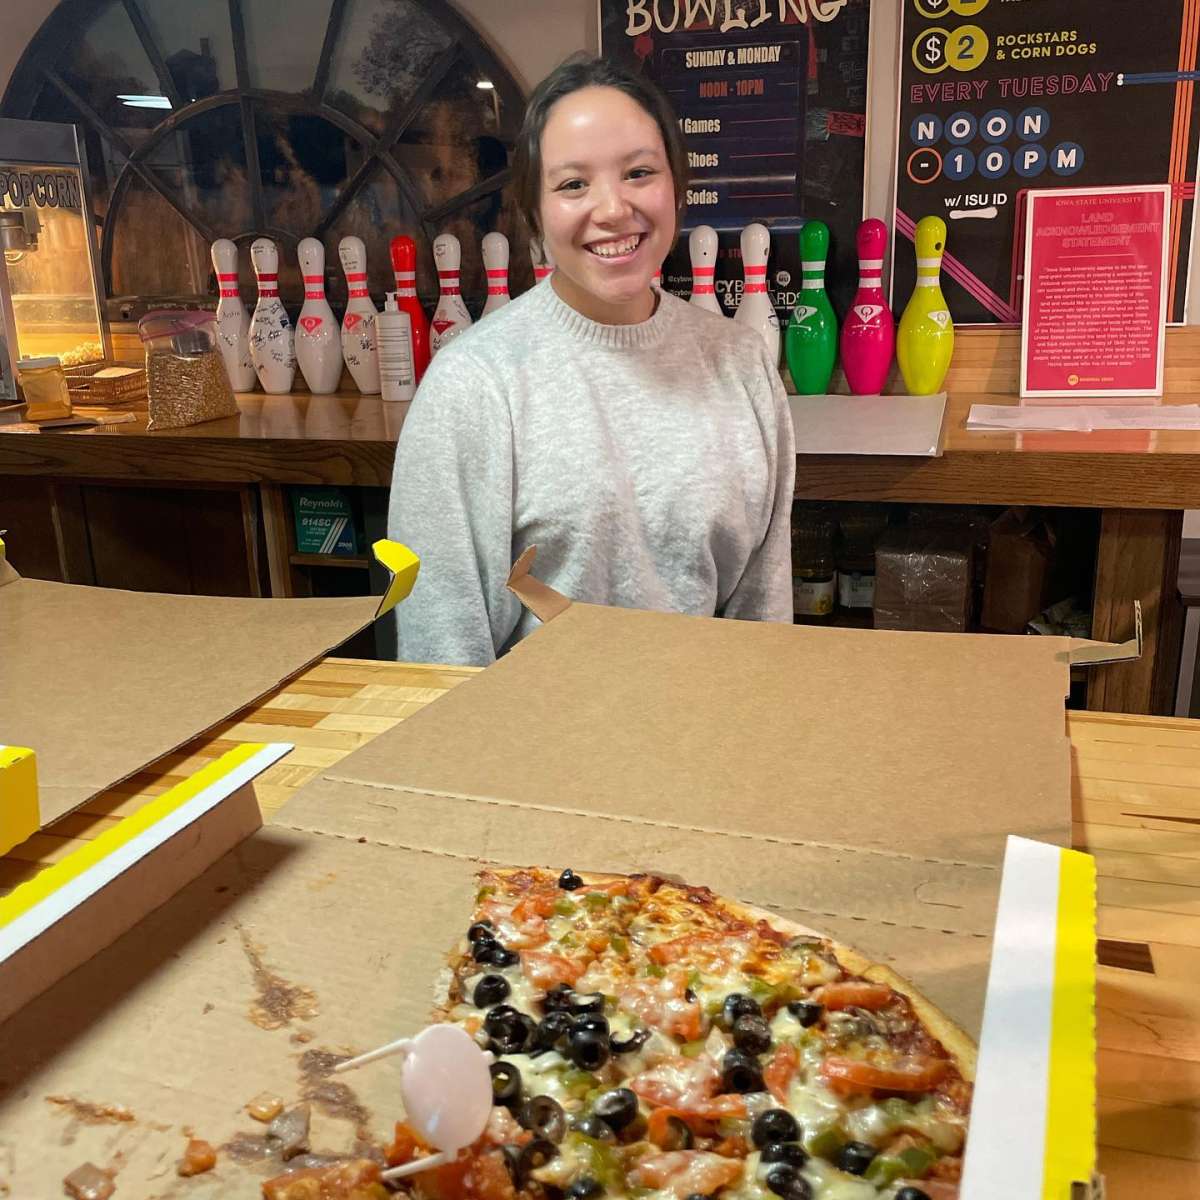 A student posing with pizza in CyBowl